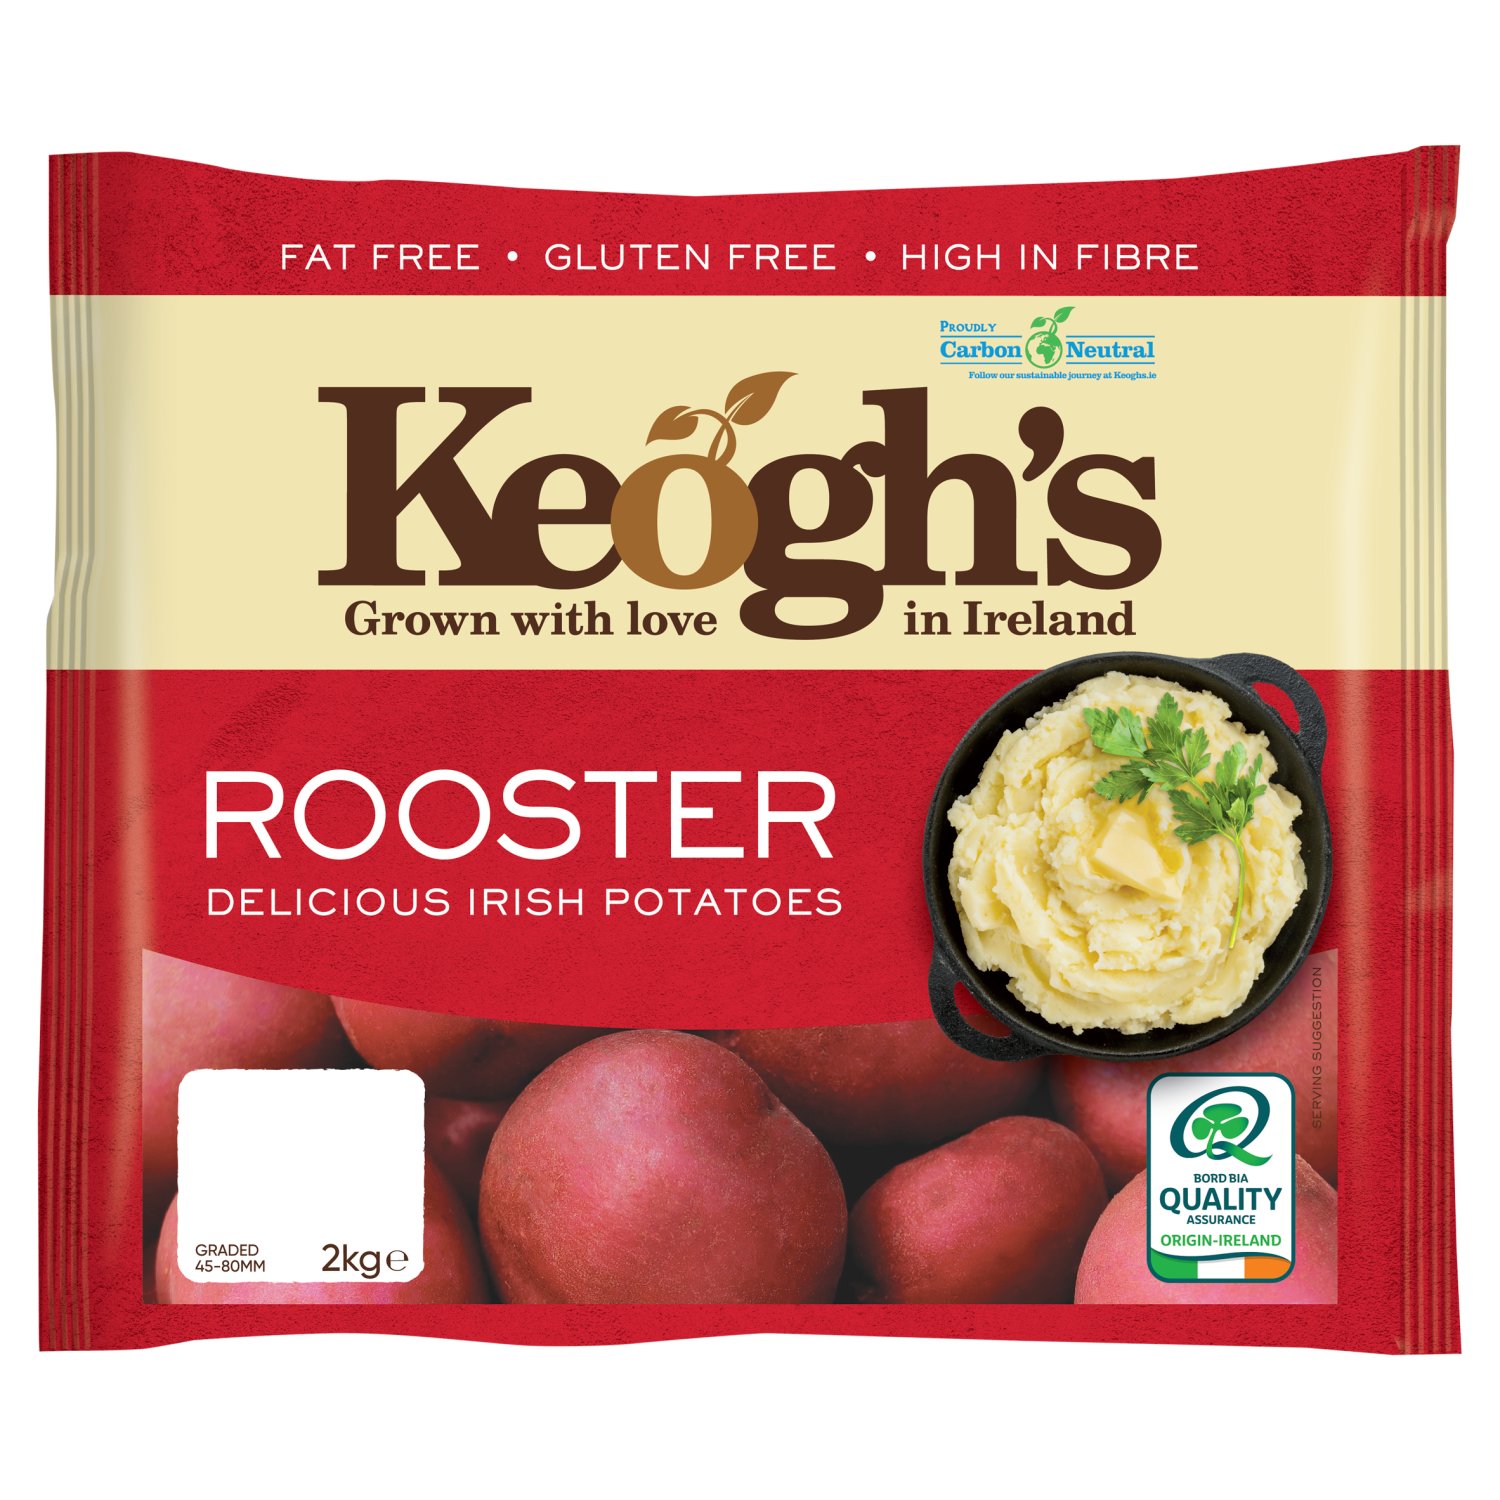 We are delighted to share our Rooster Potatoes with you today and hope you enjoy their light fluffy texture and unique delicious taste...
a Keogh family favourite!